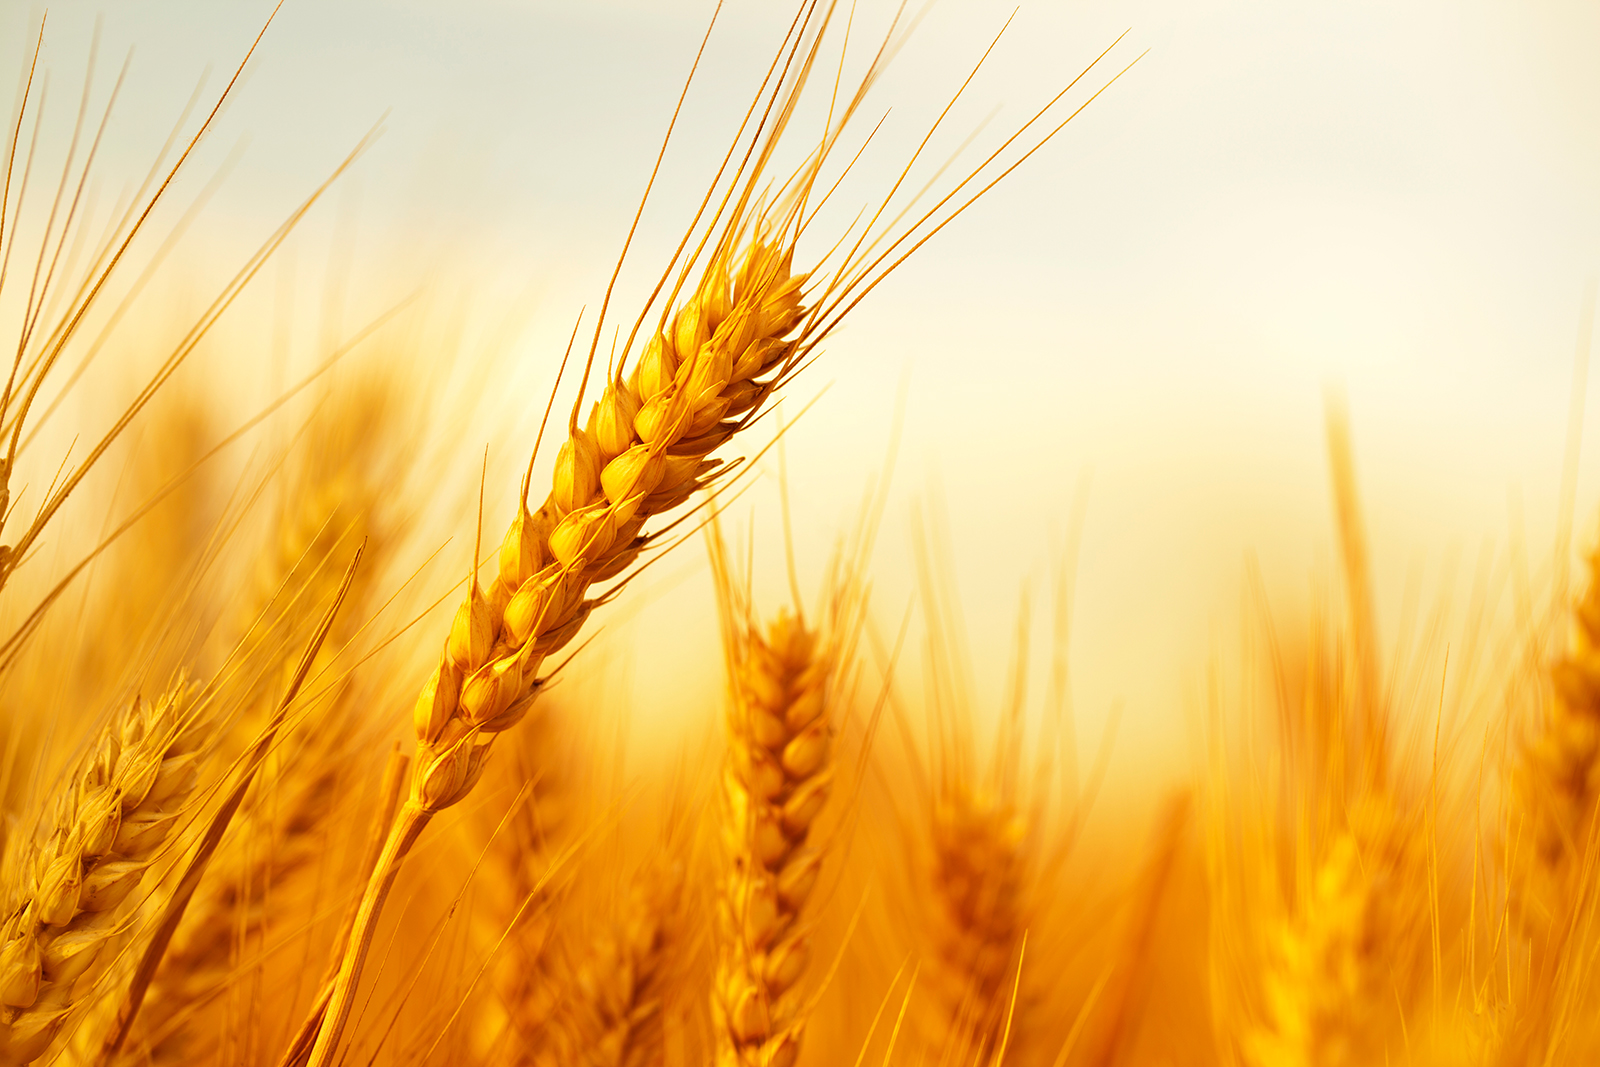 Researchers at Fraunhofer UMSICHT use bioethanol from wheat straw as fuel.